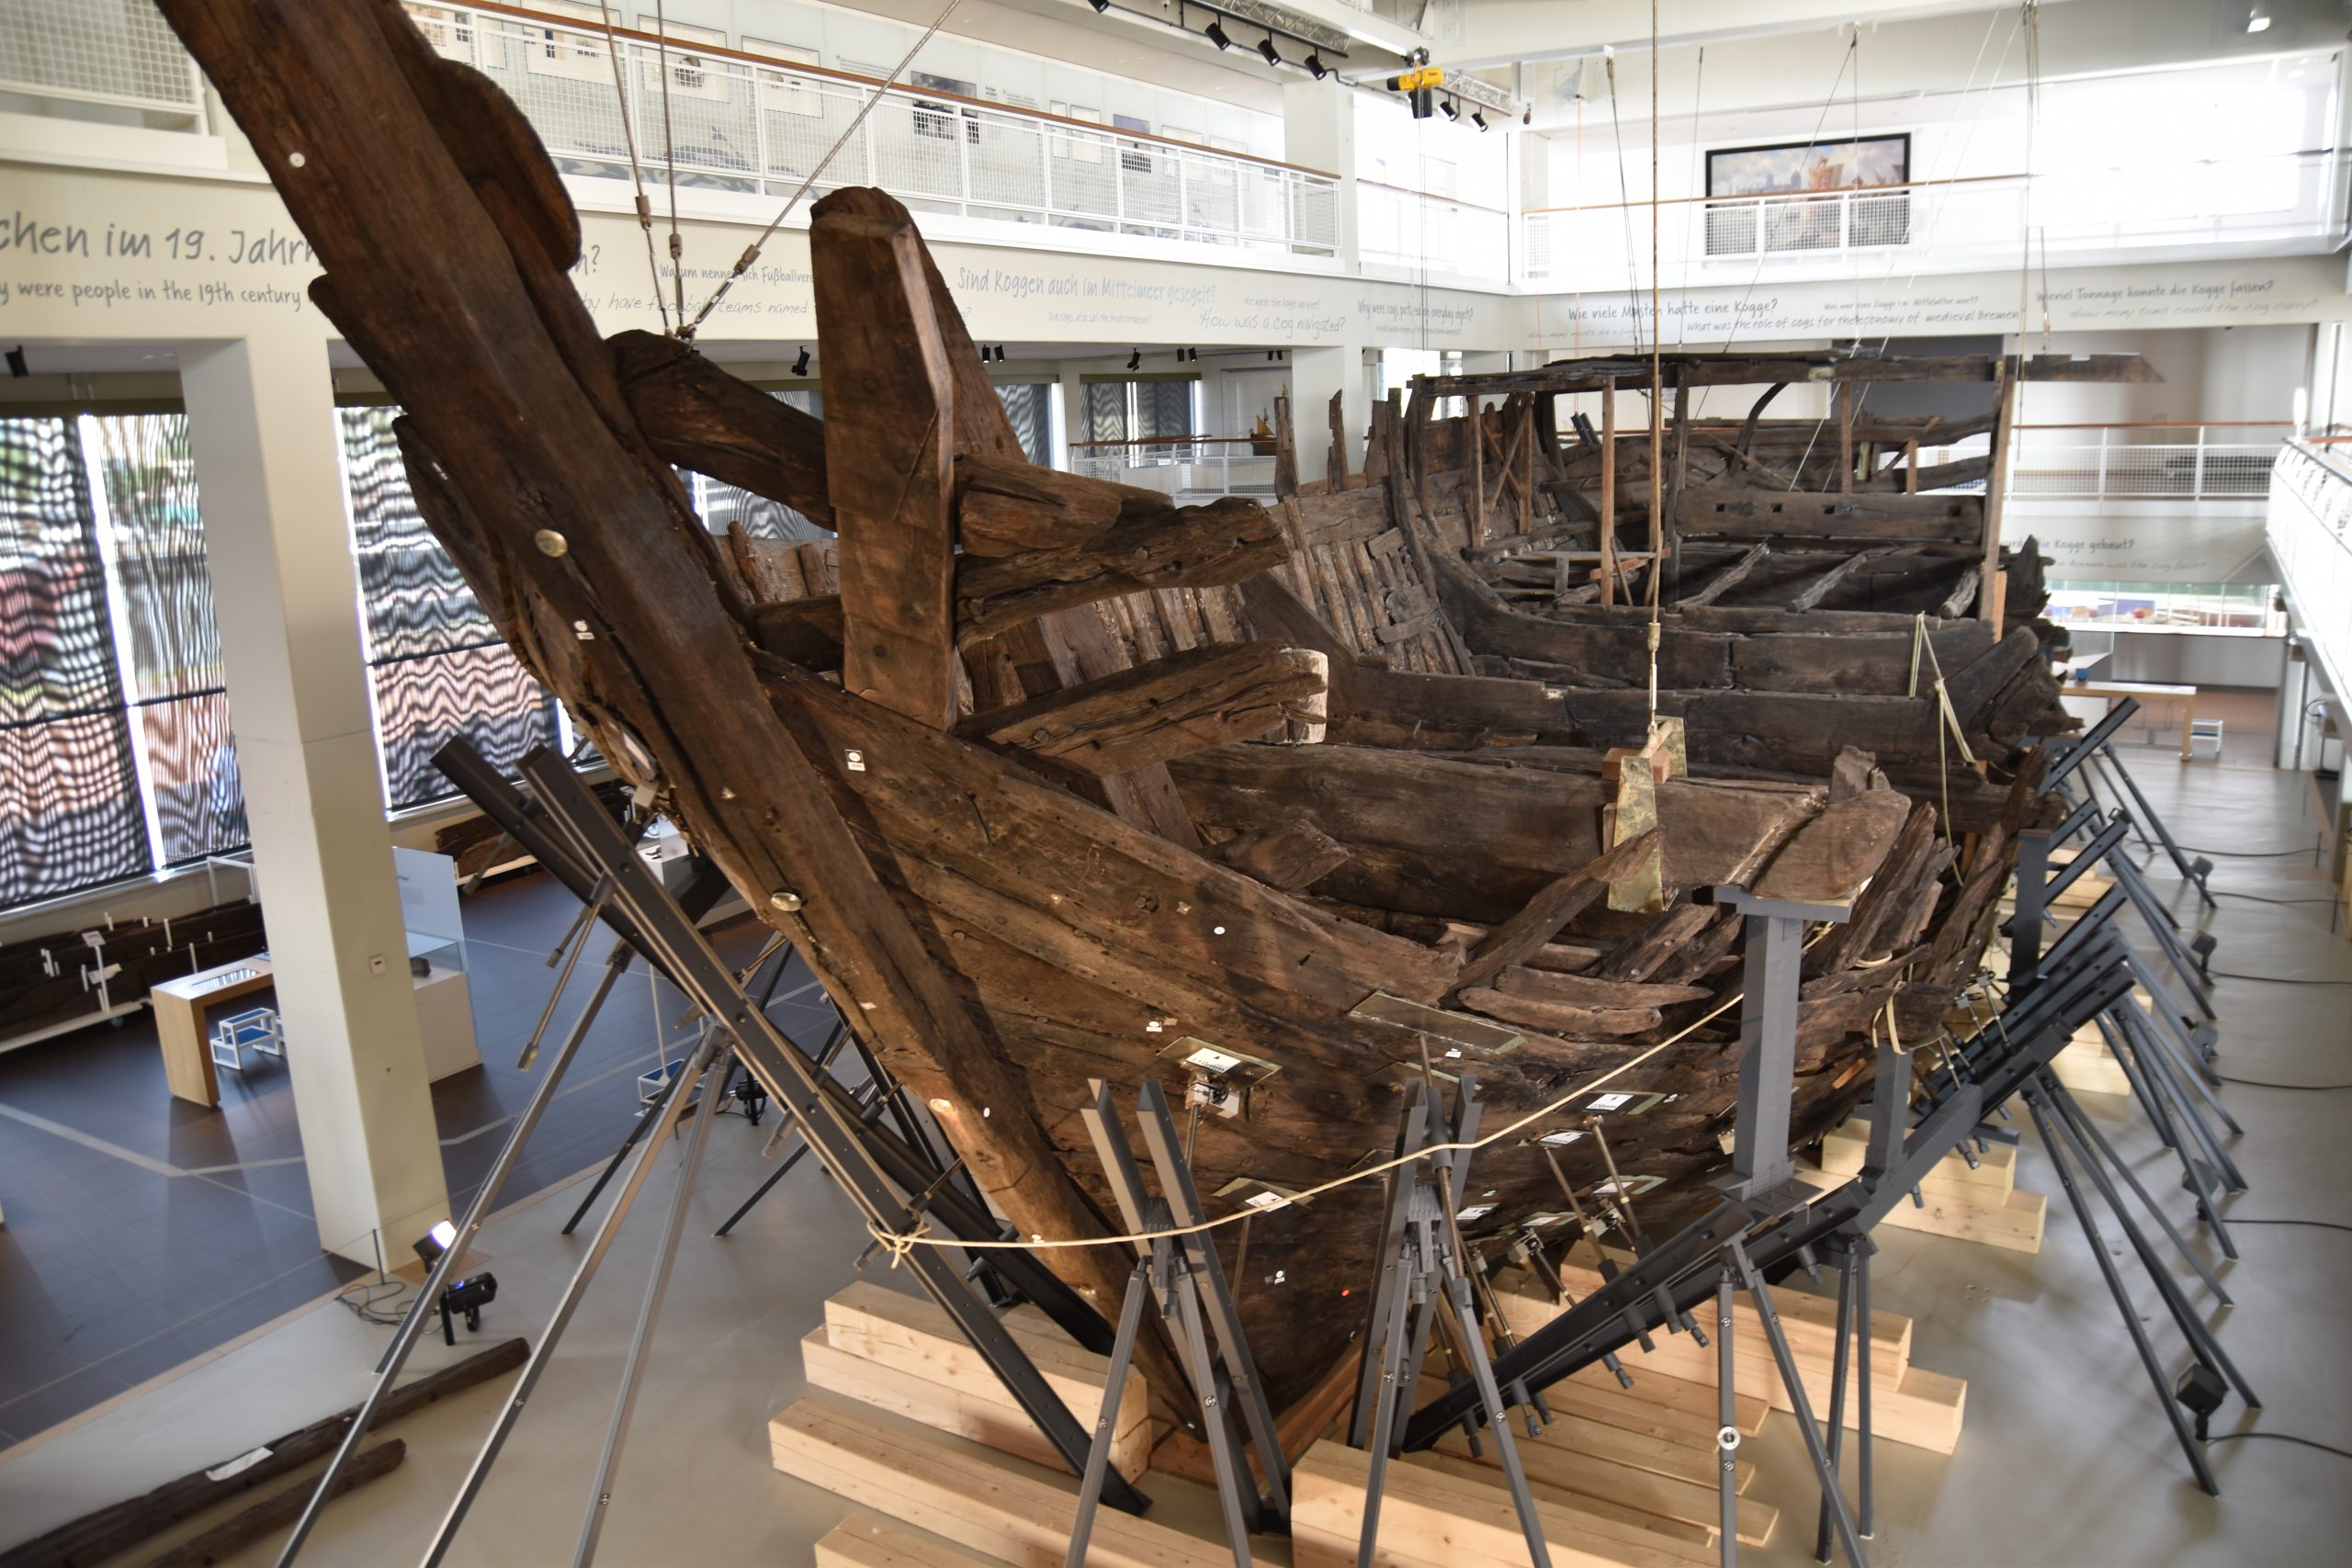 The shell of a ship in the German Maritime Museum.